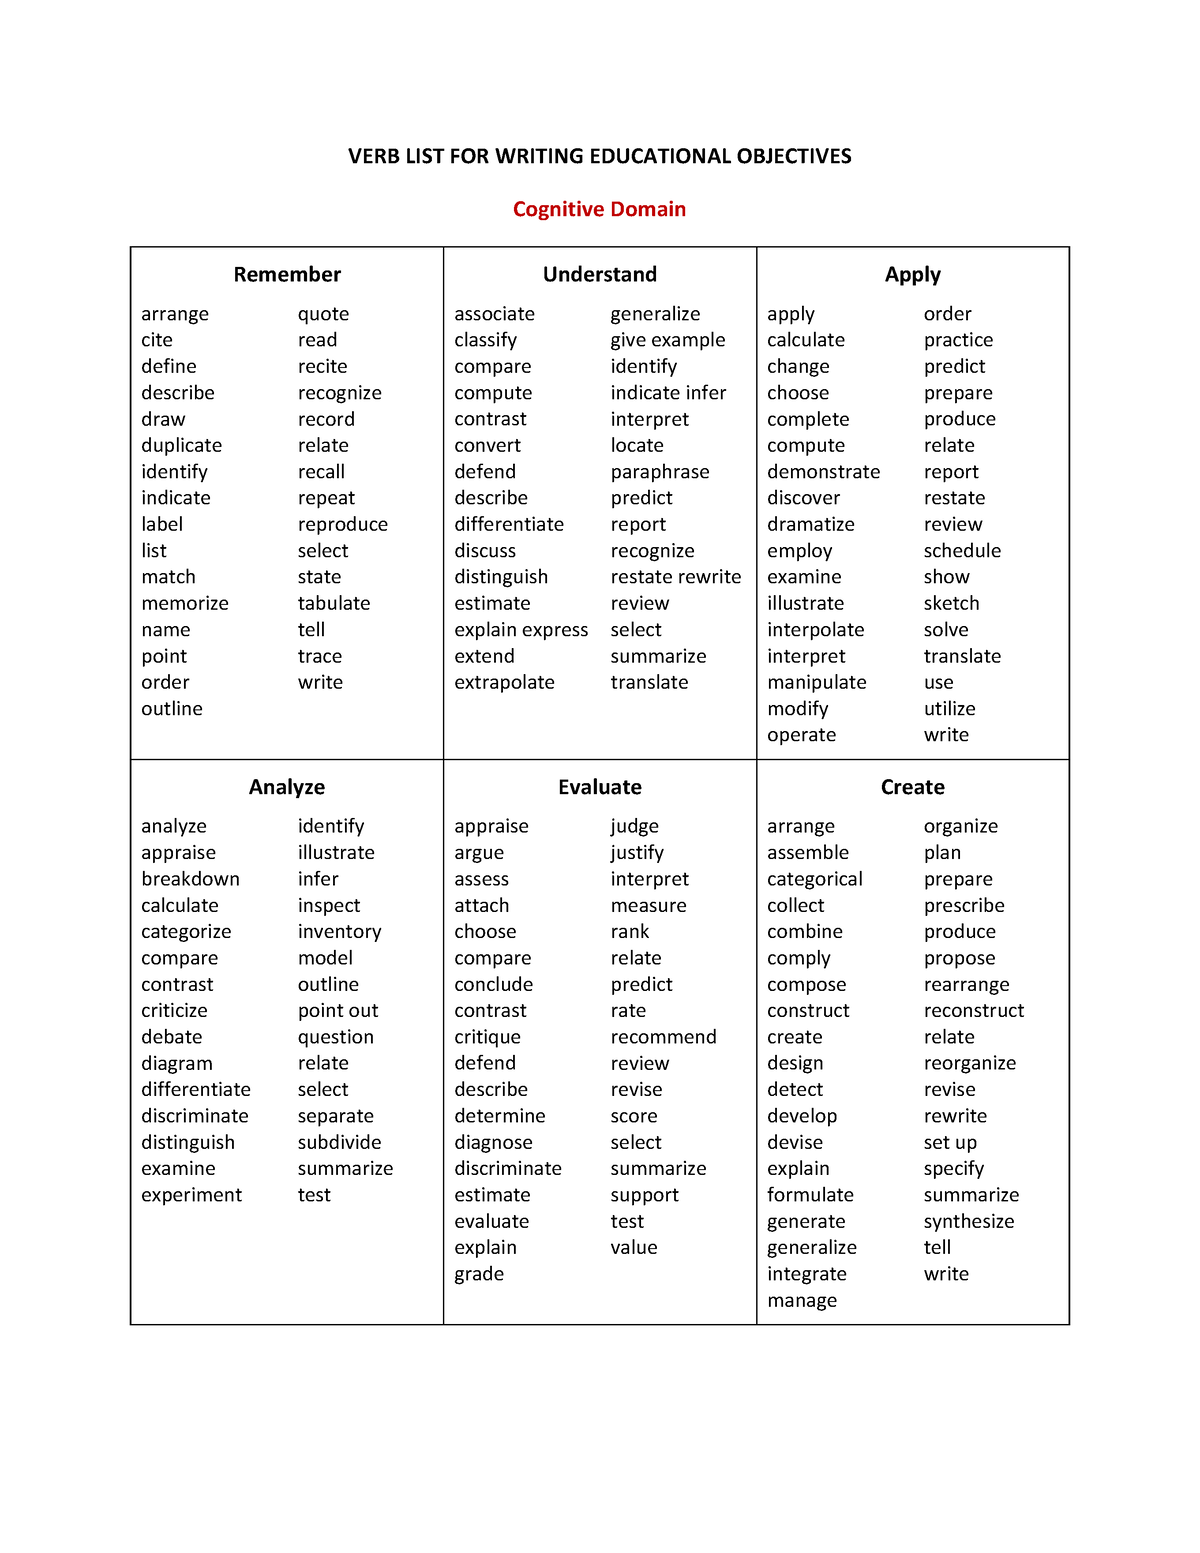 verbs-checklist-for-objective-in-lesson-planning-verb-list-for